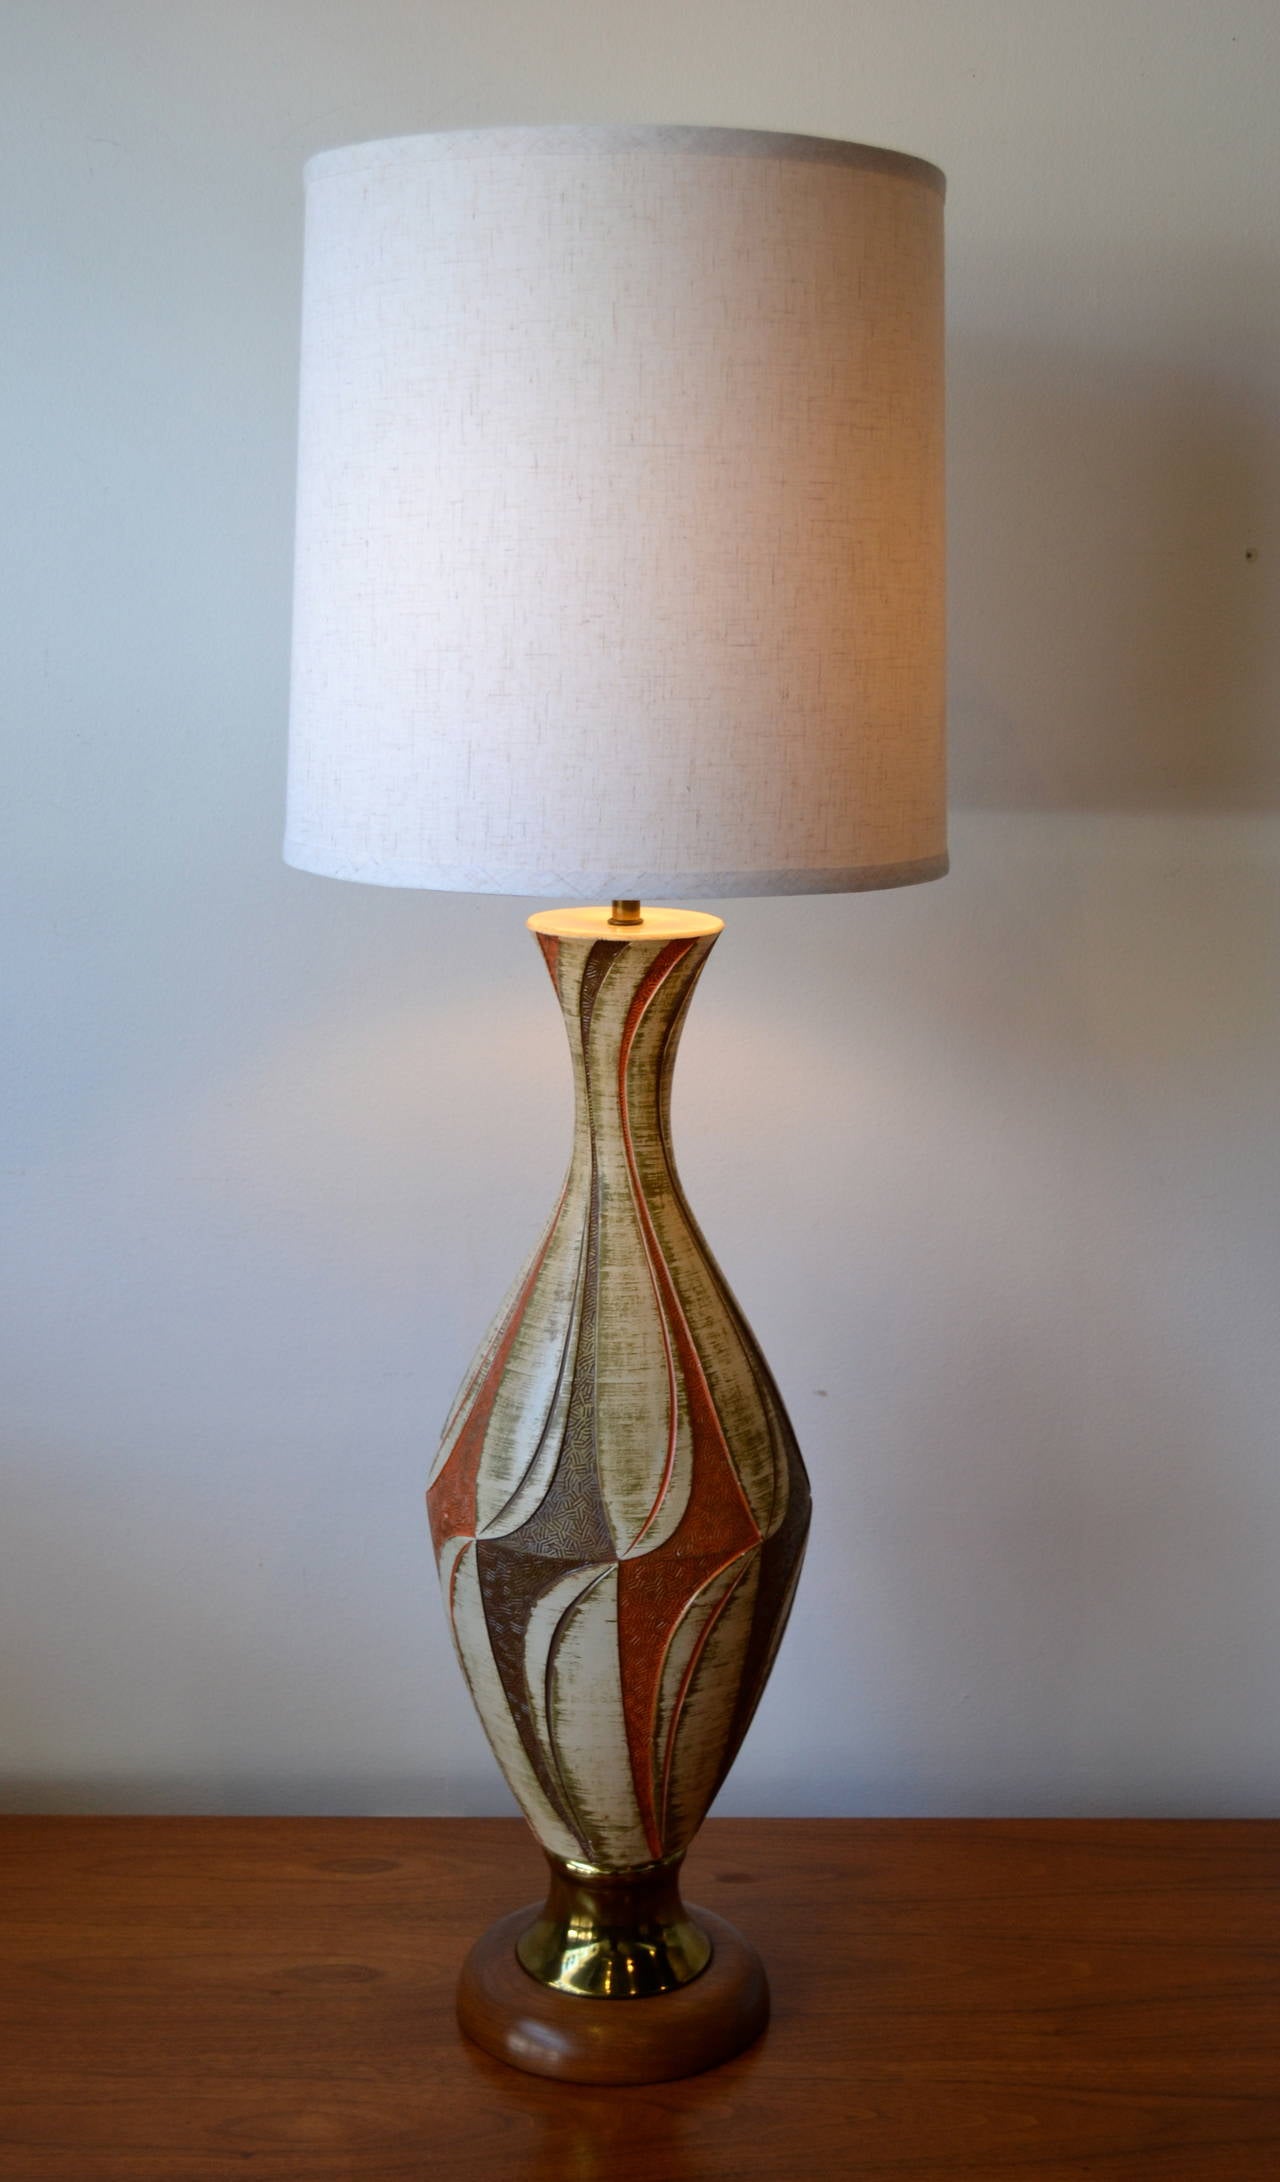 Large scale Mid Century ceramic table lamp, colorful geometric pattern.  